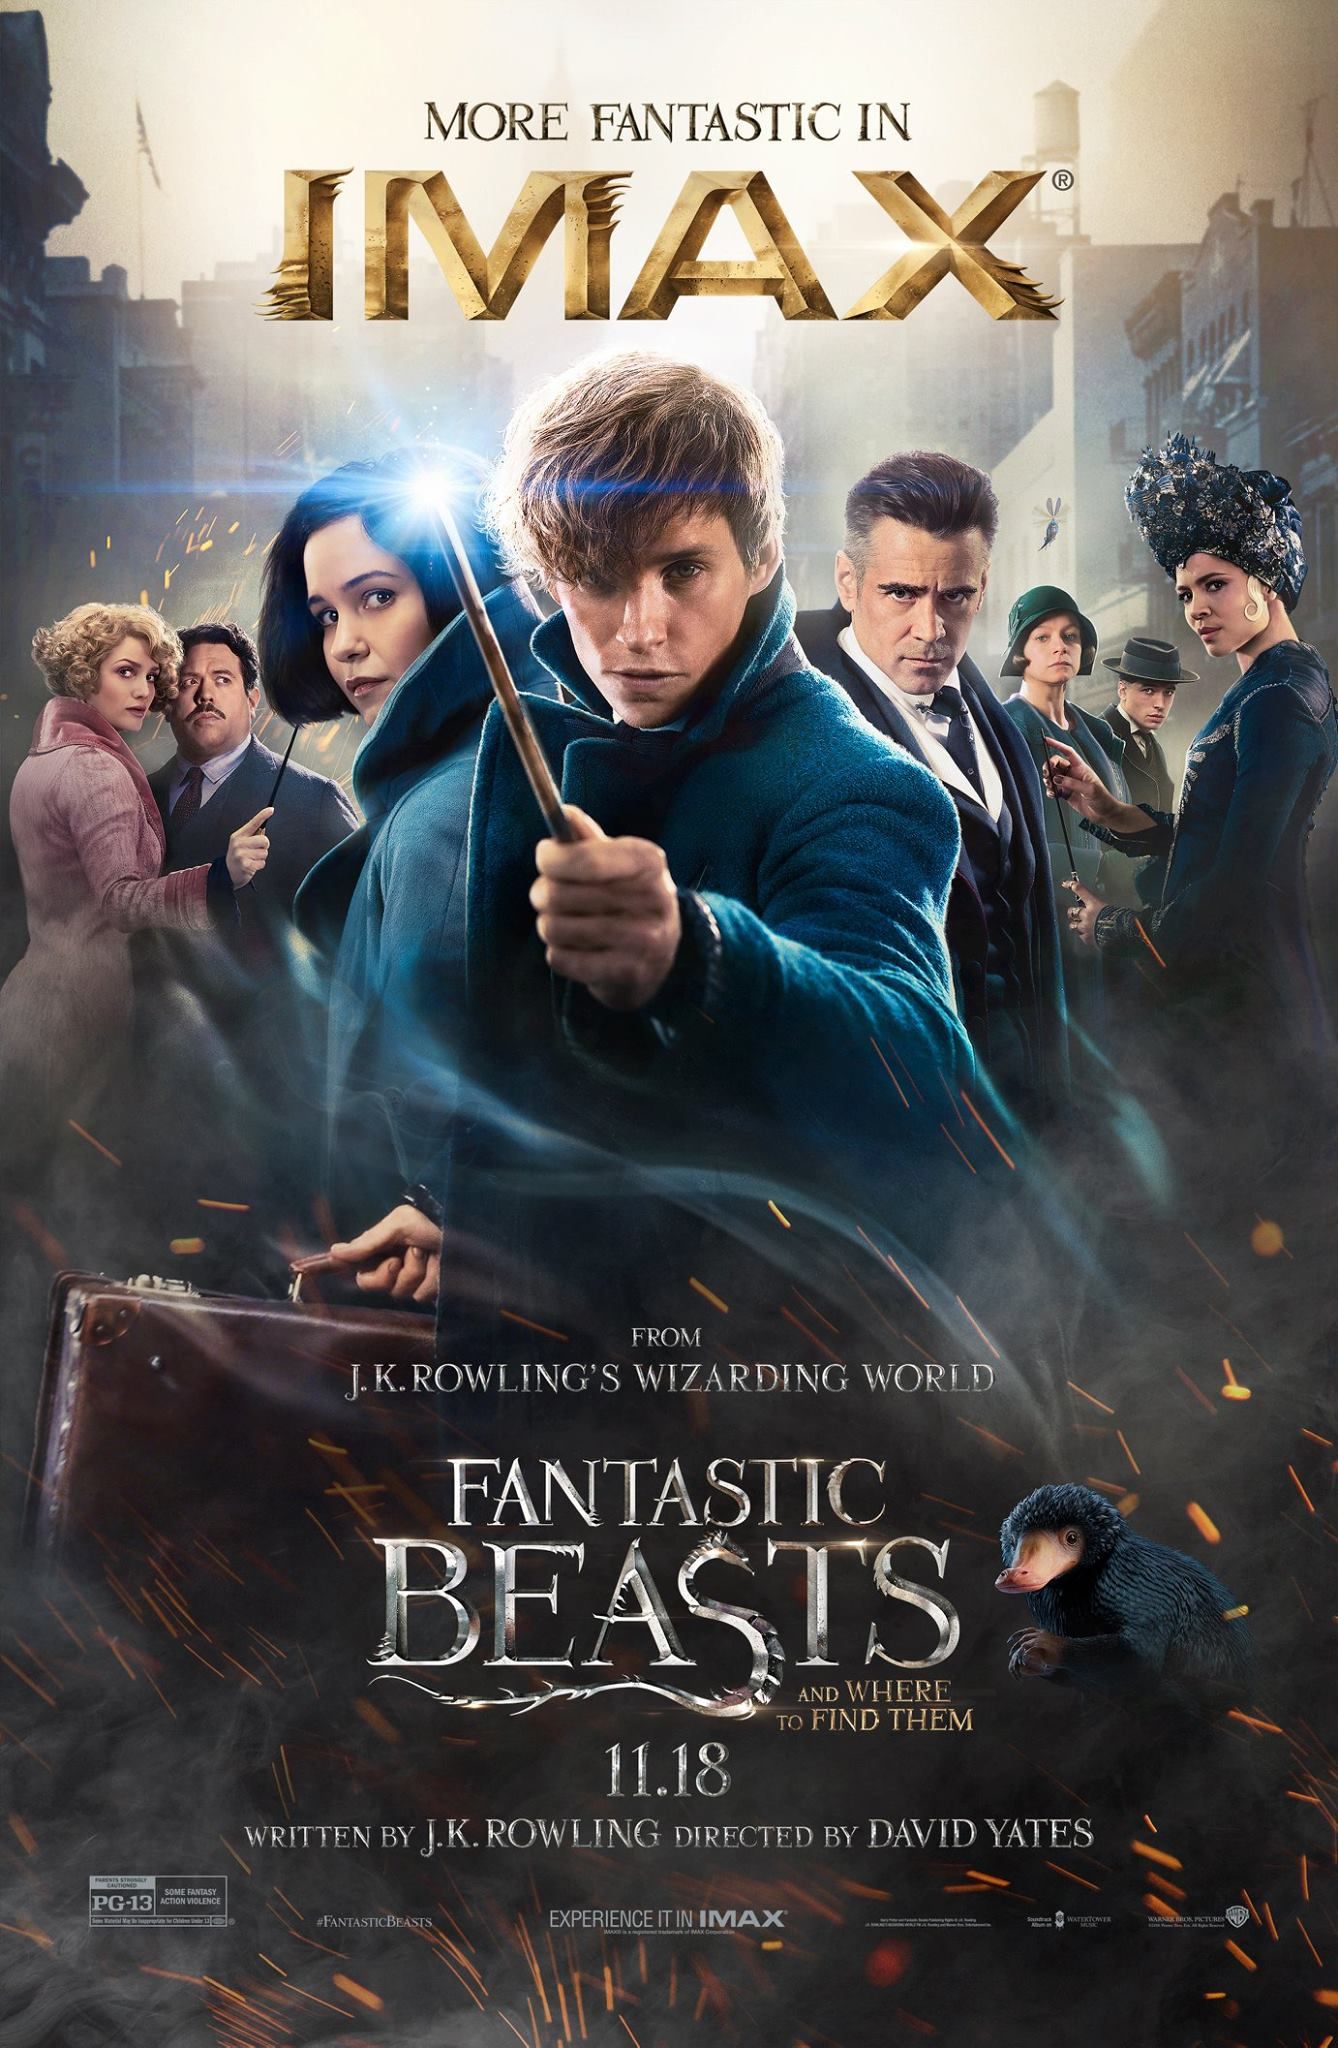 Official IMAX Poster for 'Fantastic Beasts and Where To Find Them'